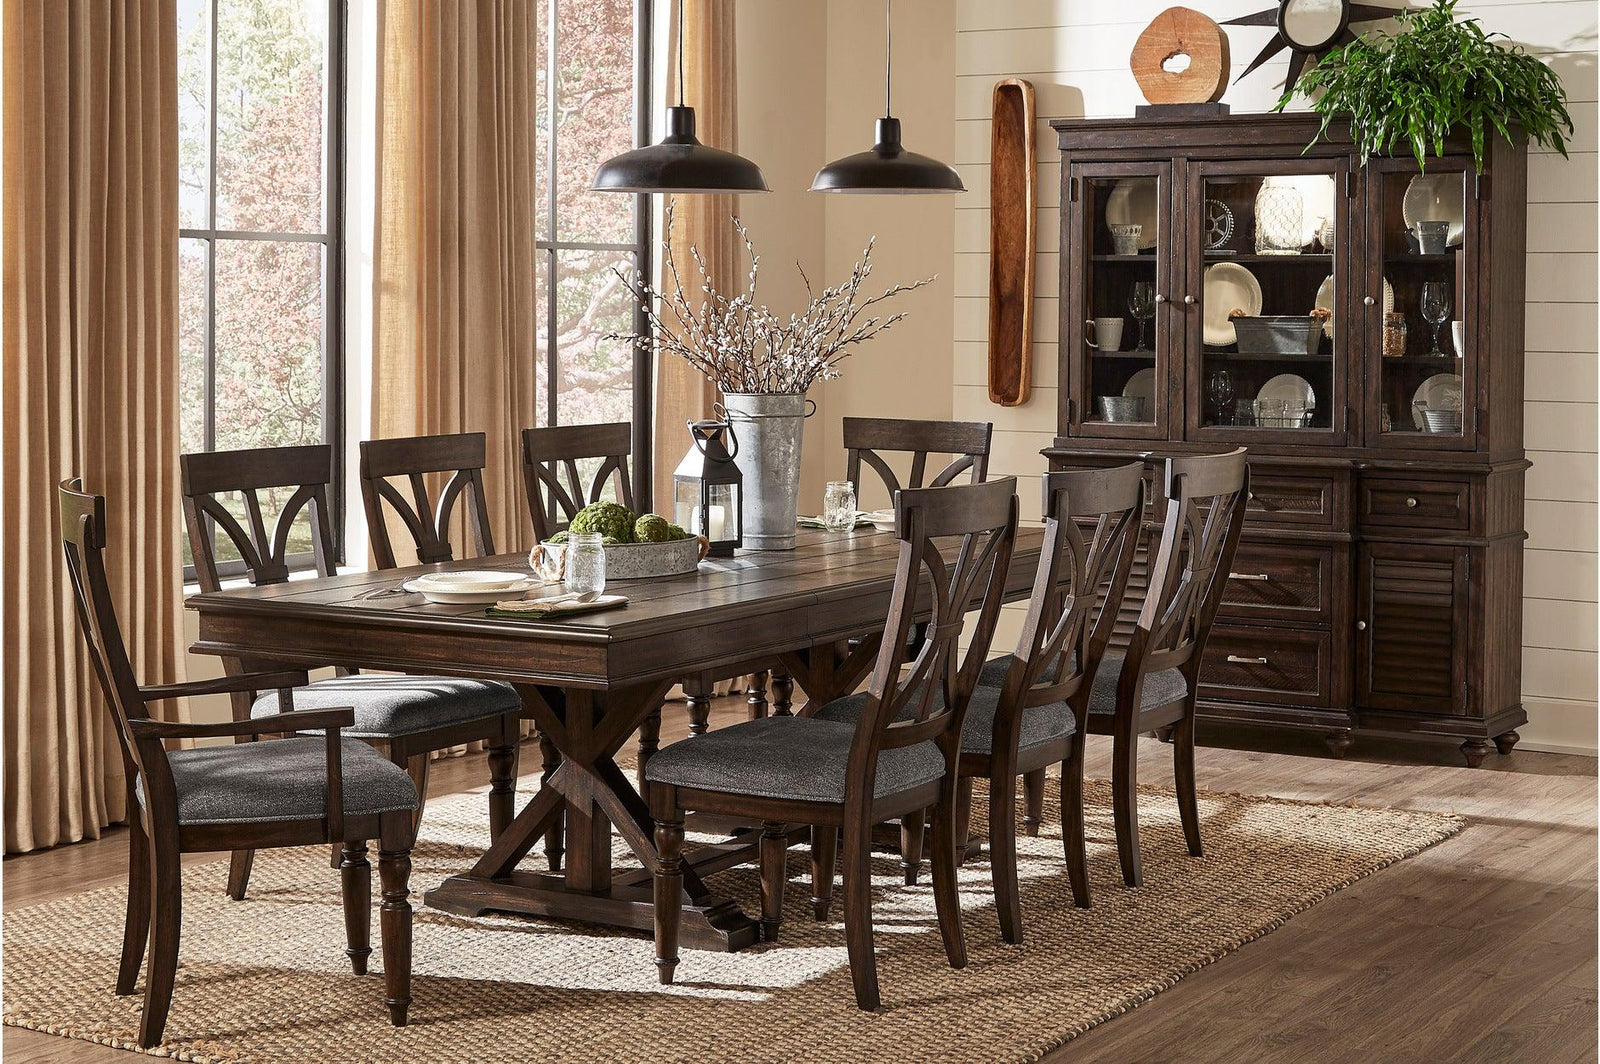 Cardano Charcoal Traditional Solid Wood Fabric Upholstery Seat Rectangular Dining Room Set - Ella Furniture